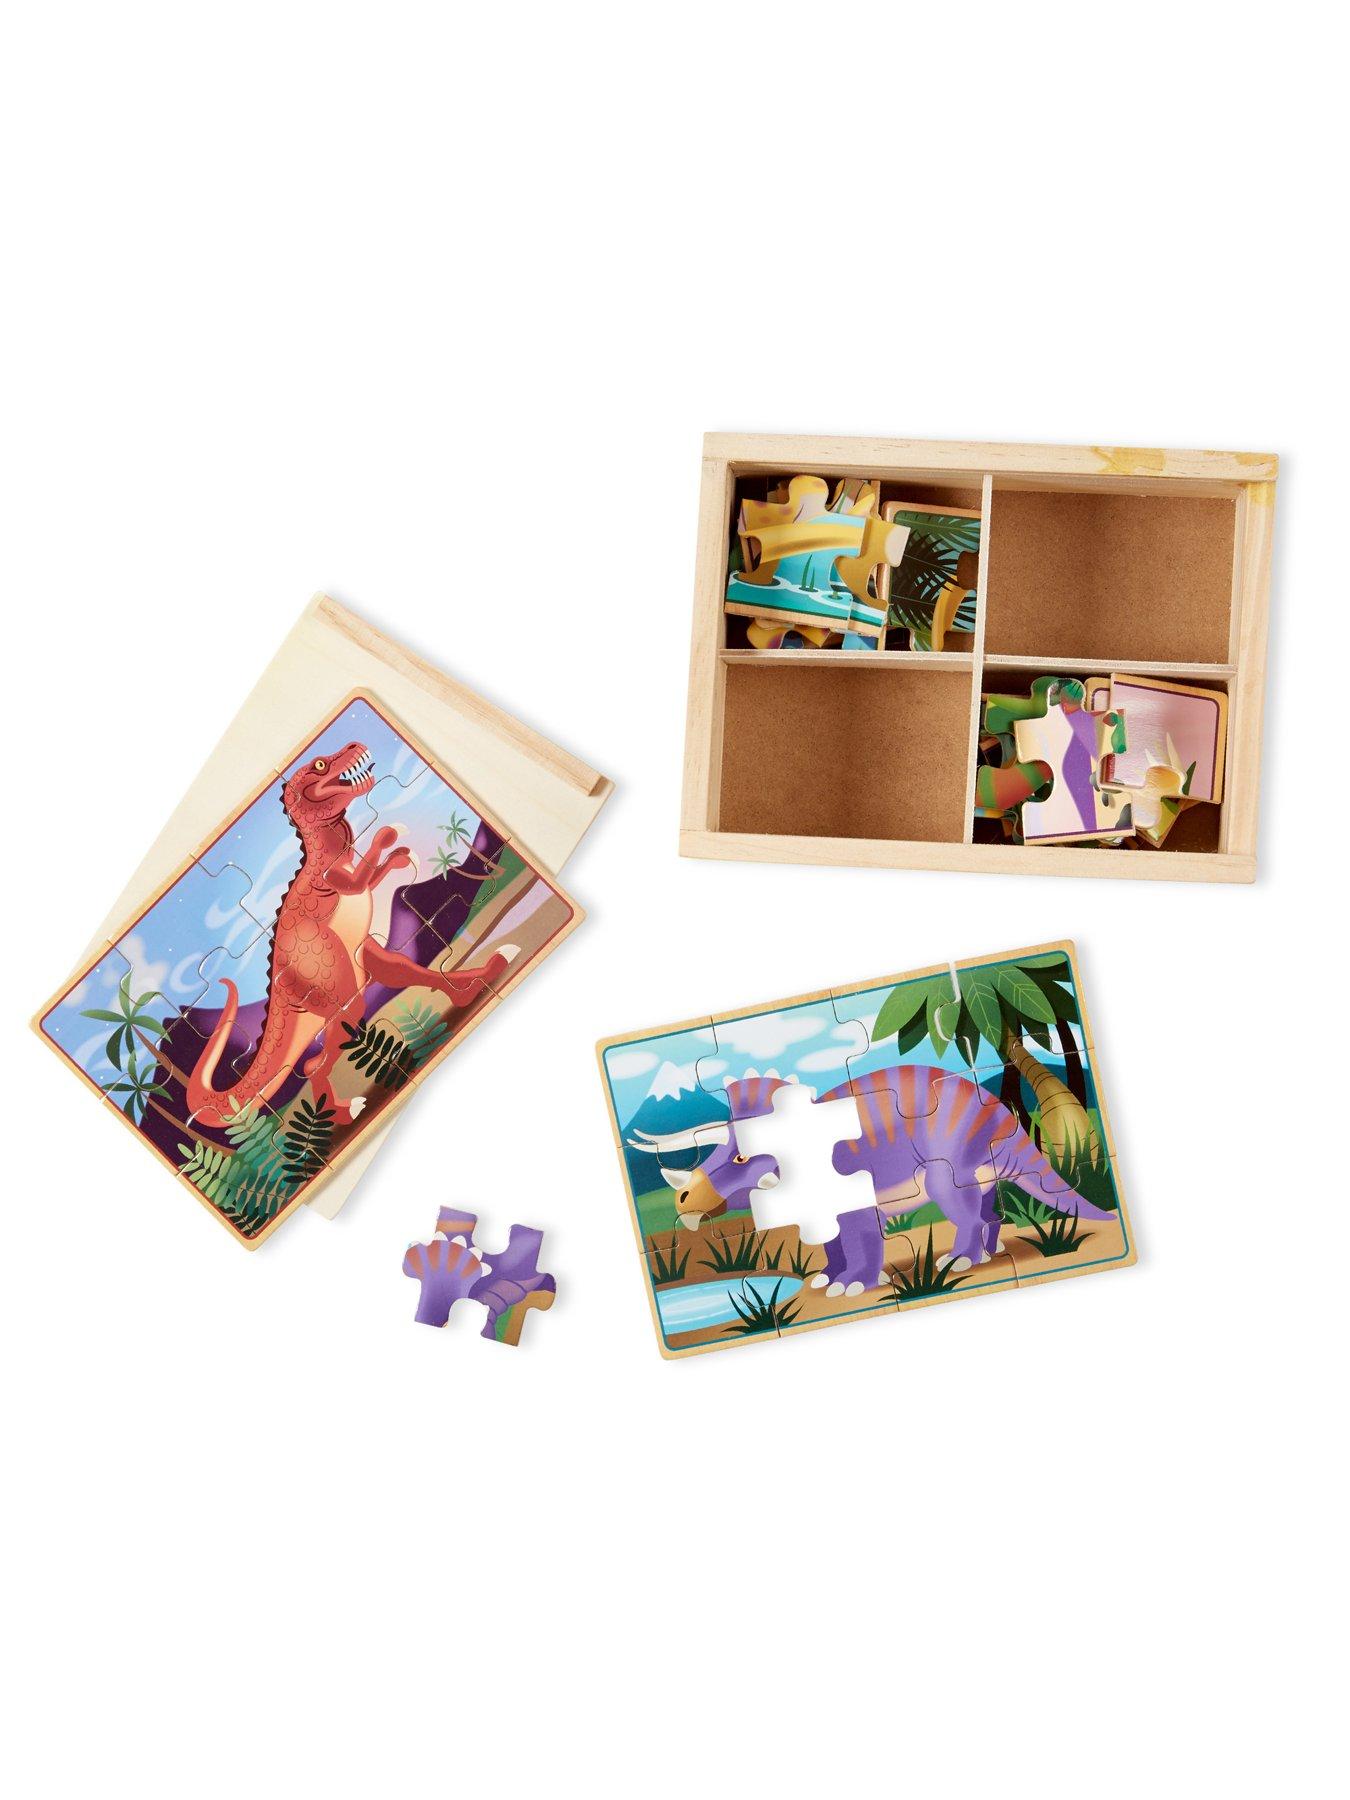 Wooden Jigsaw Puzzles in a Box - Dinosaurs